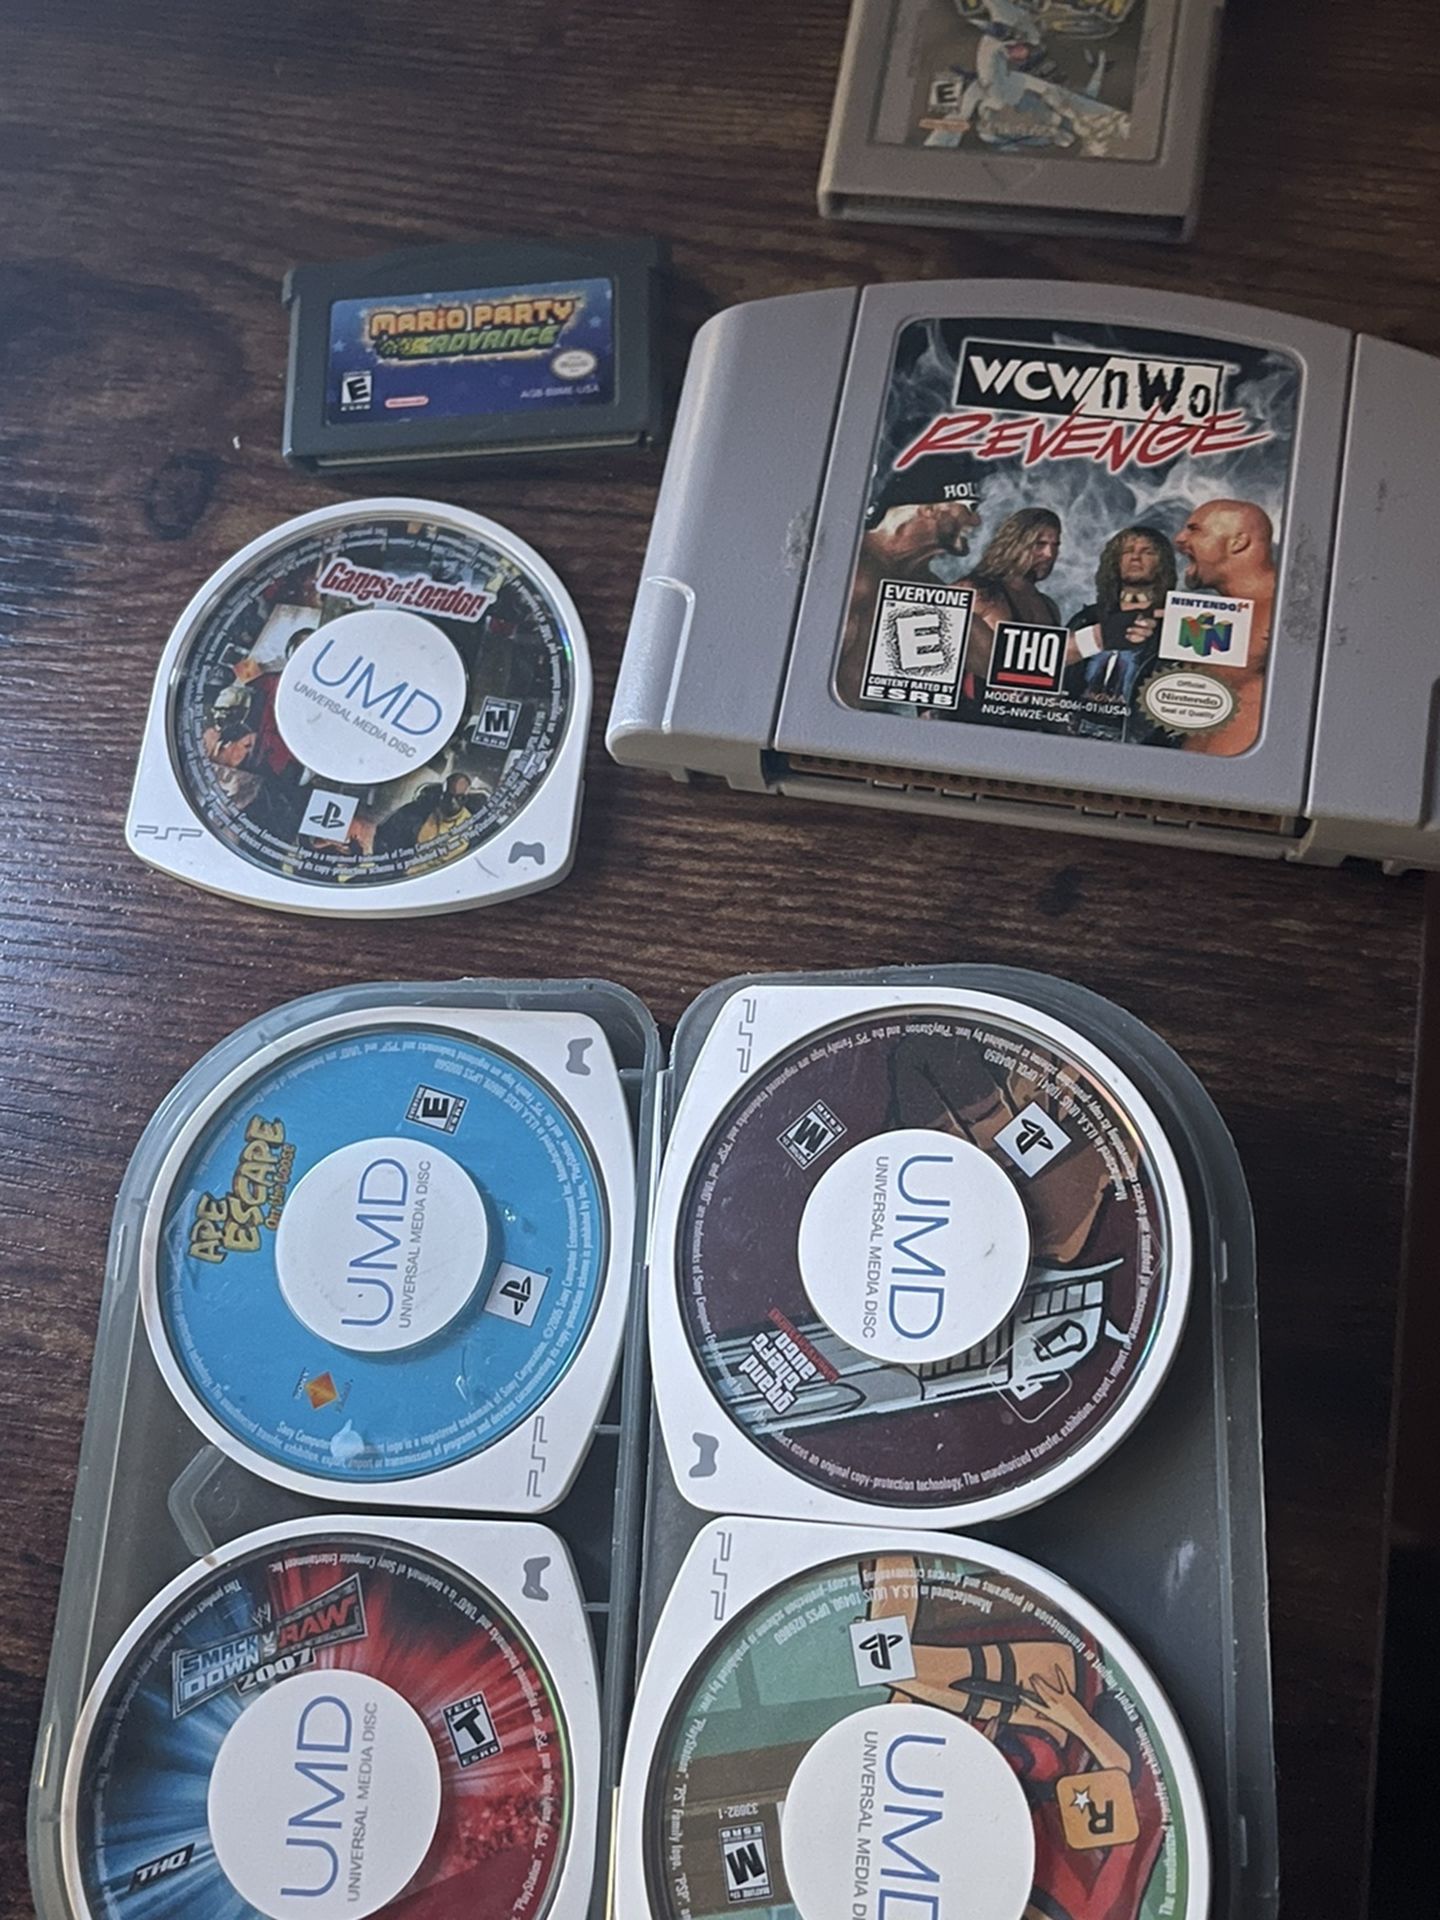 PSP, N64, and Game boy Games!